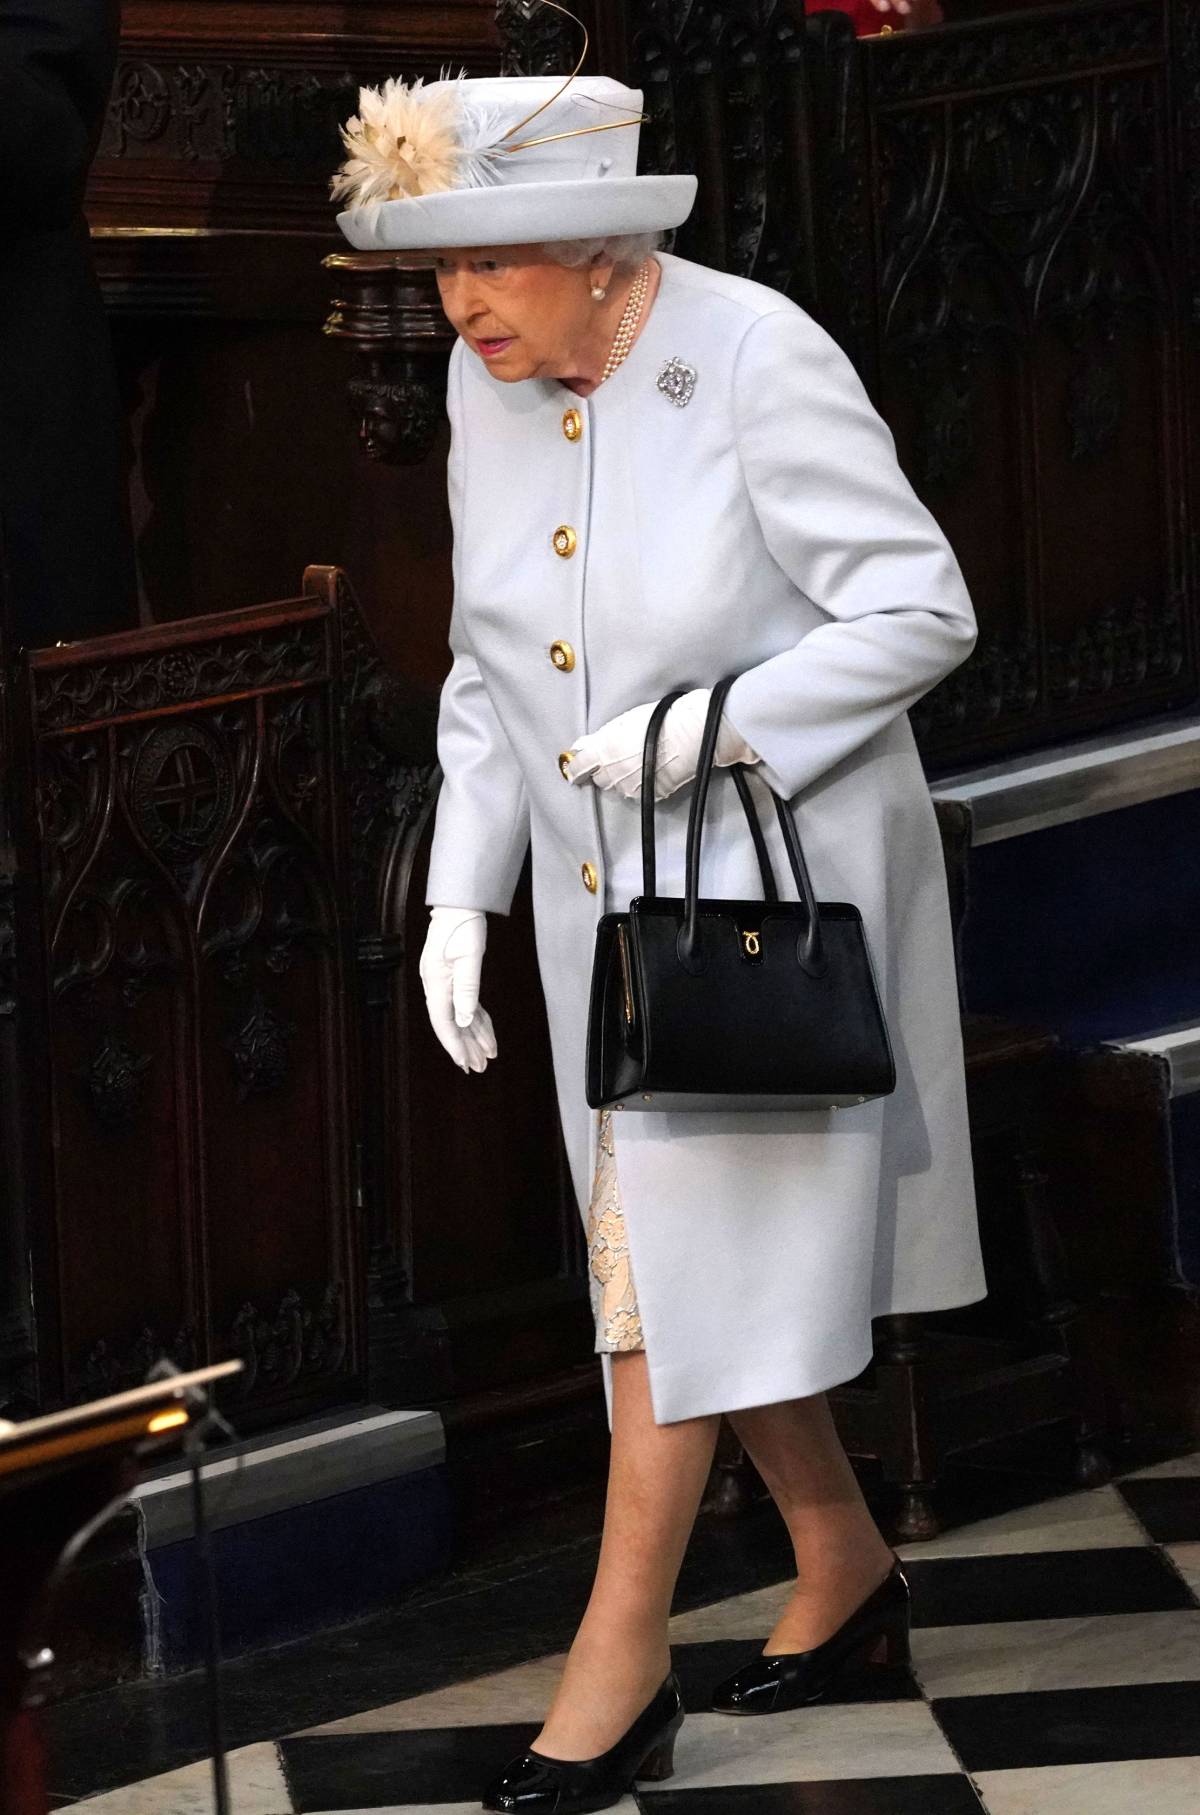 Launer launches handbags to celebrate Queen's 94th birthday